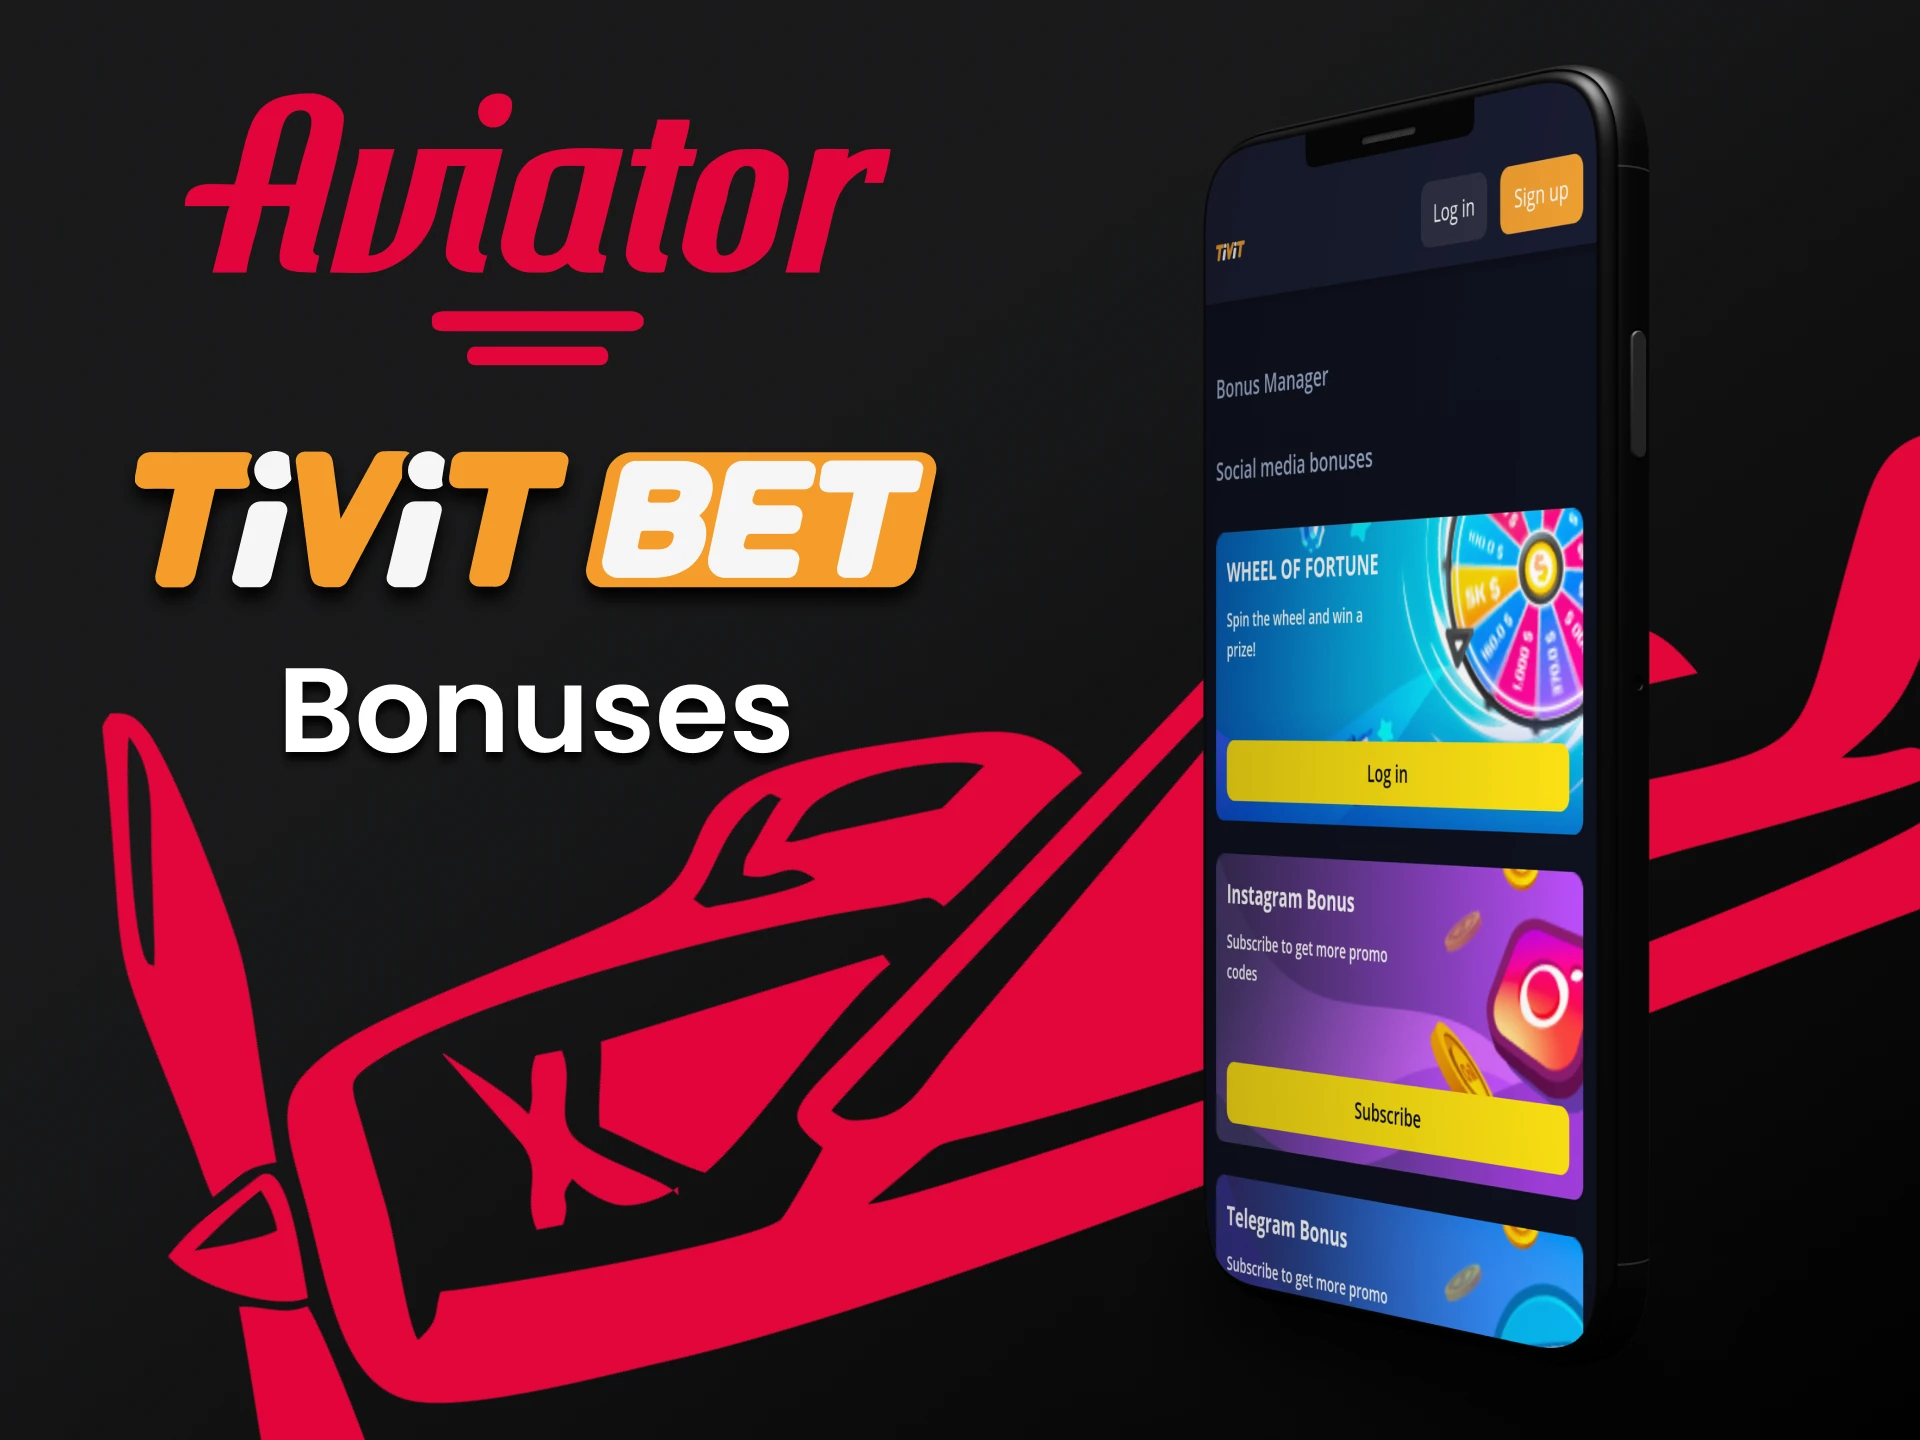 Get bonuses for playing Aviator in the Tivitbet app.